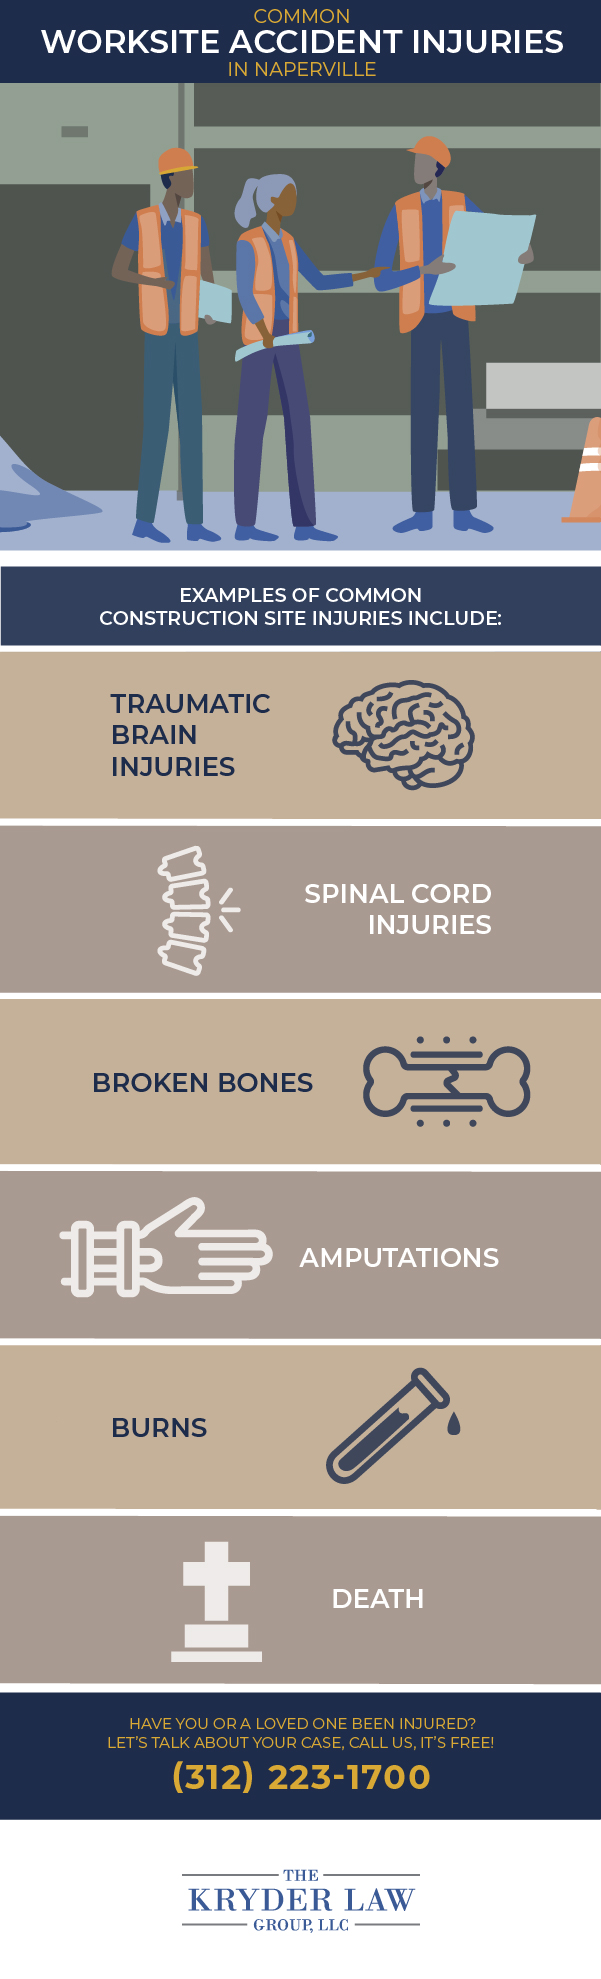 Common Worksite Accident Injuries in Naperville